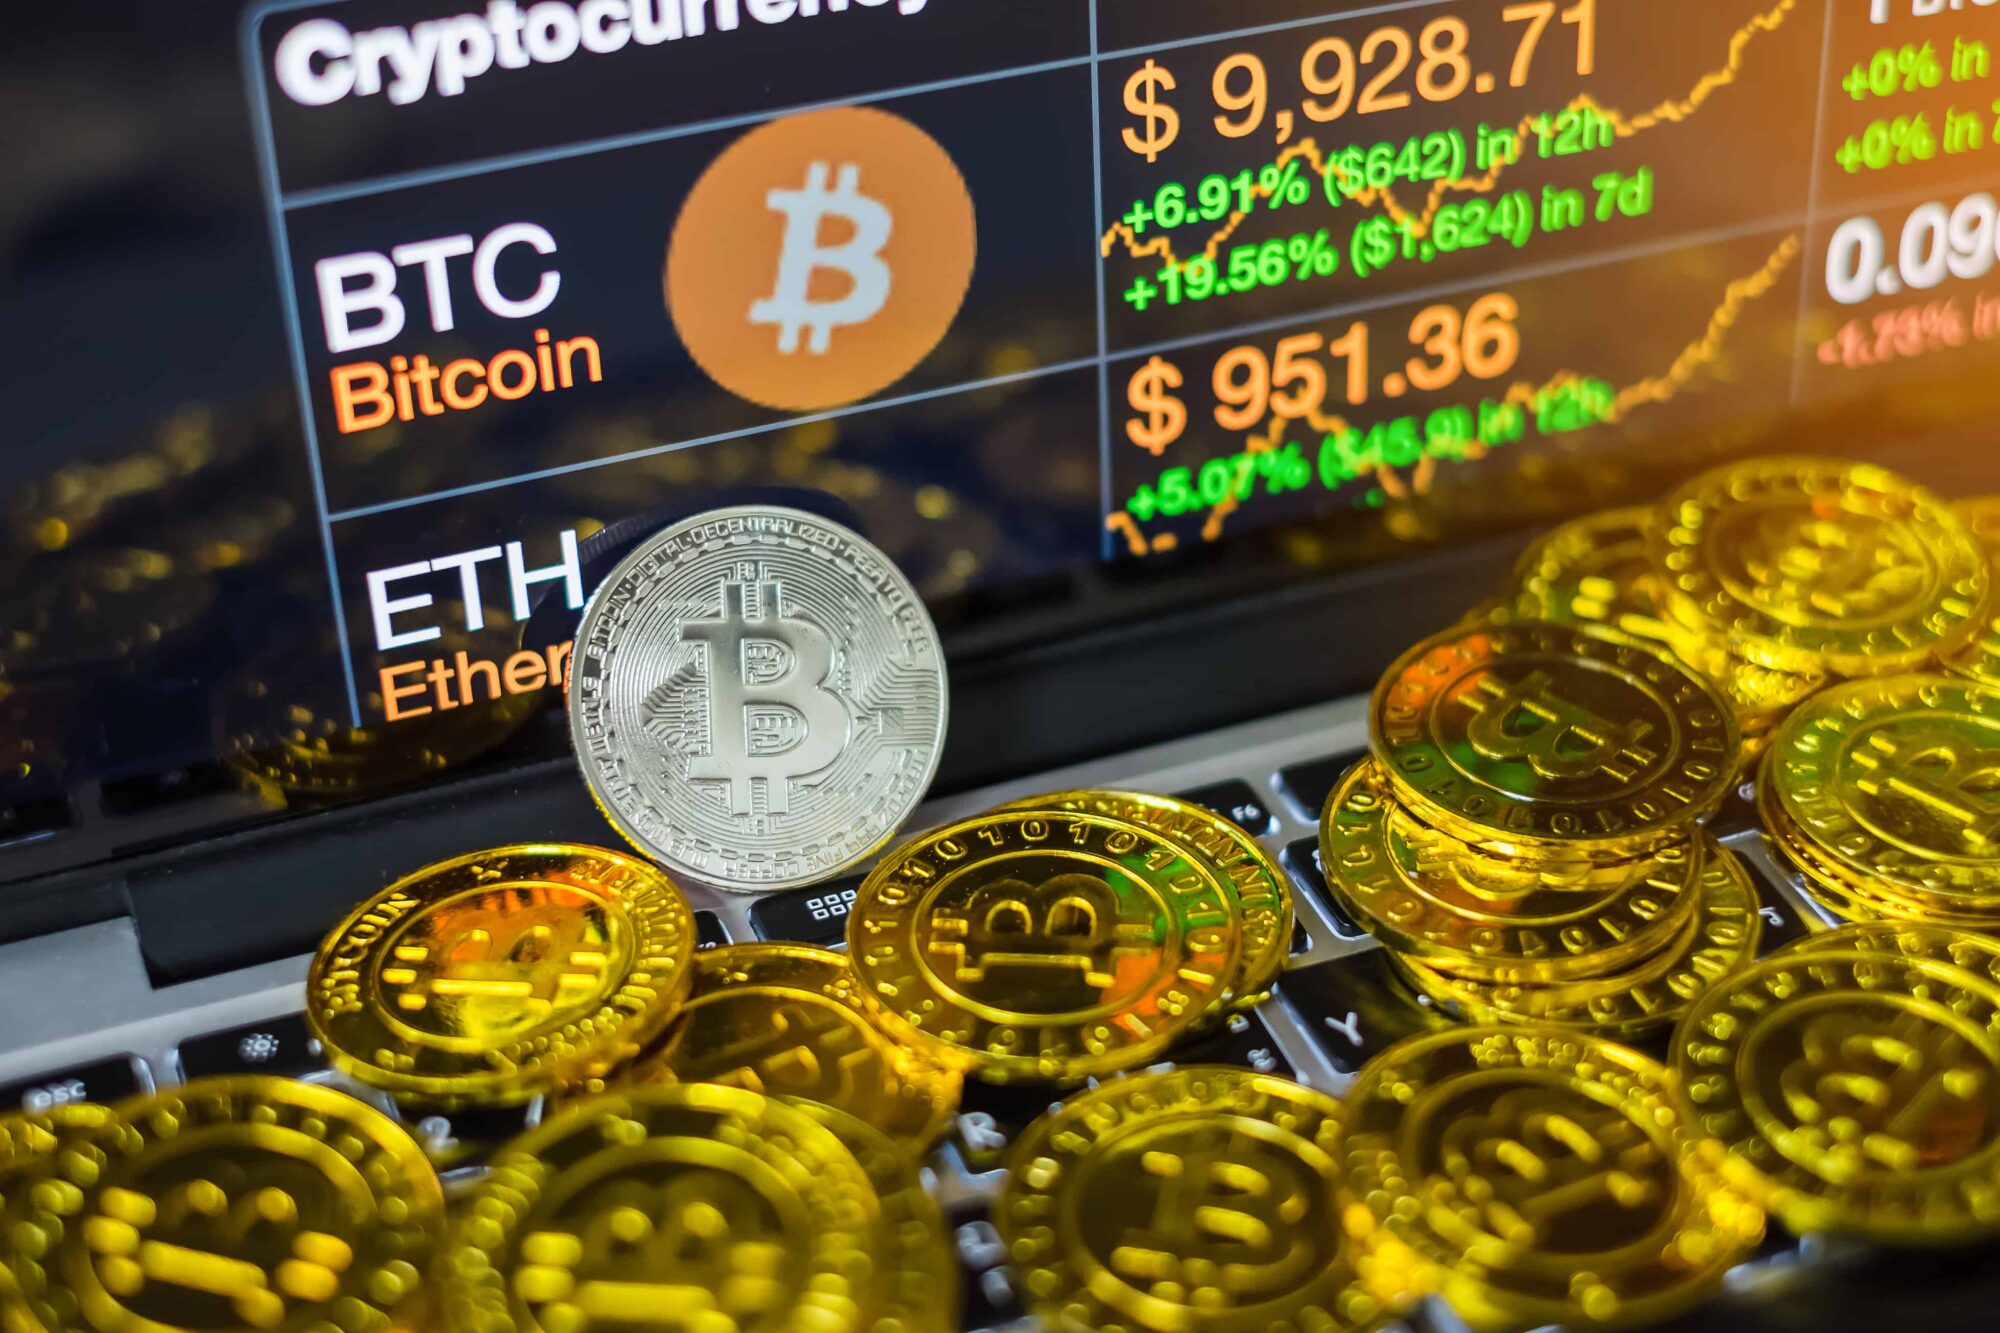 Bitcoin drops to one-month low after market slump